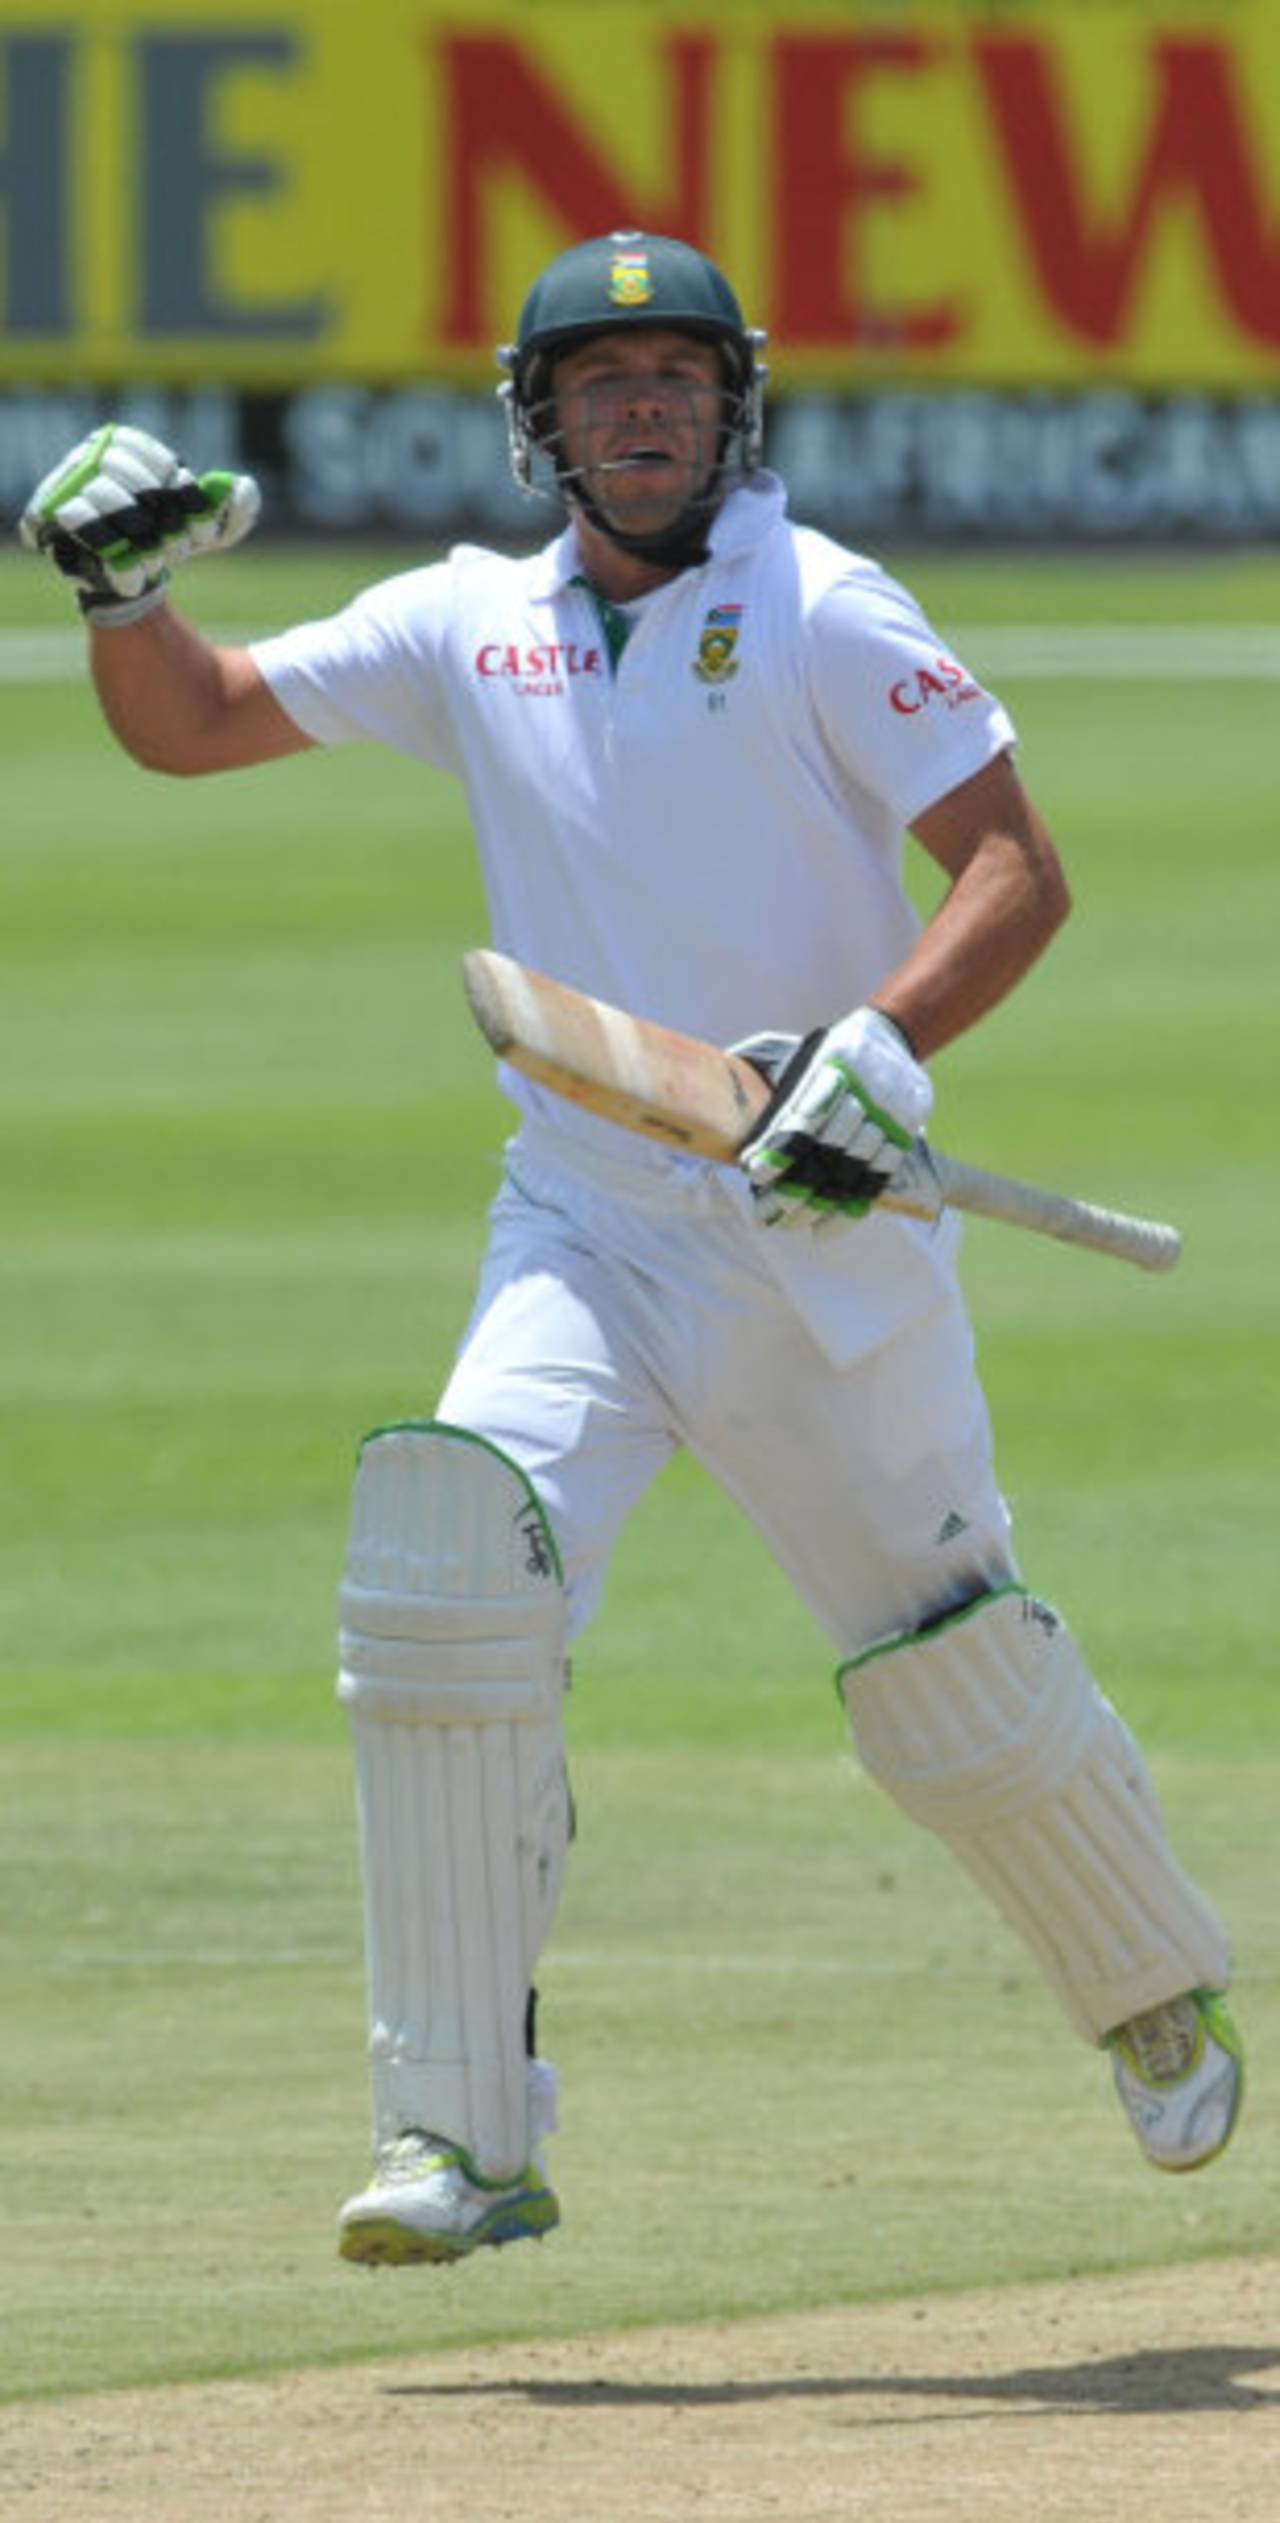 AB de Villiers celebrates a milestone on his way to 160 not out, South Africa v Sri Lanka, January, 4, 2011